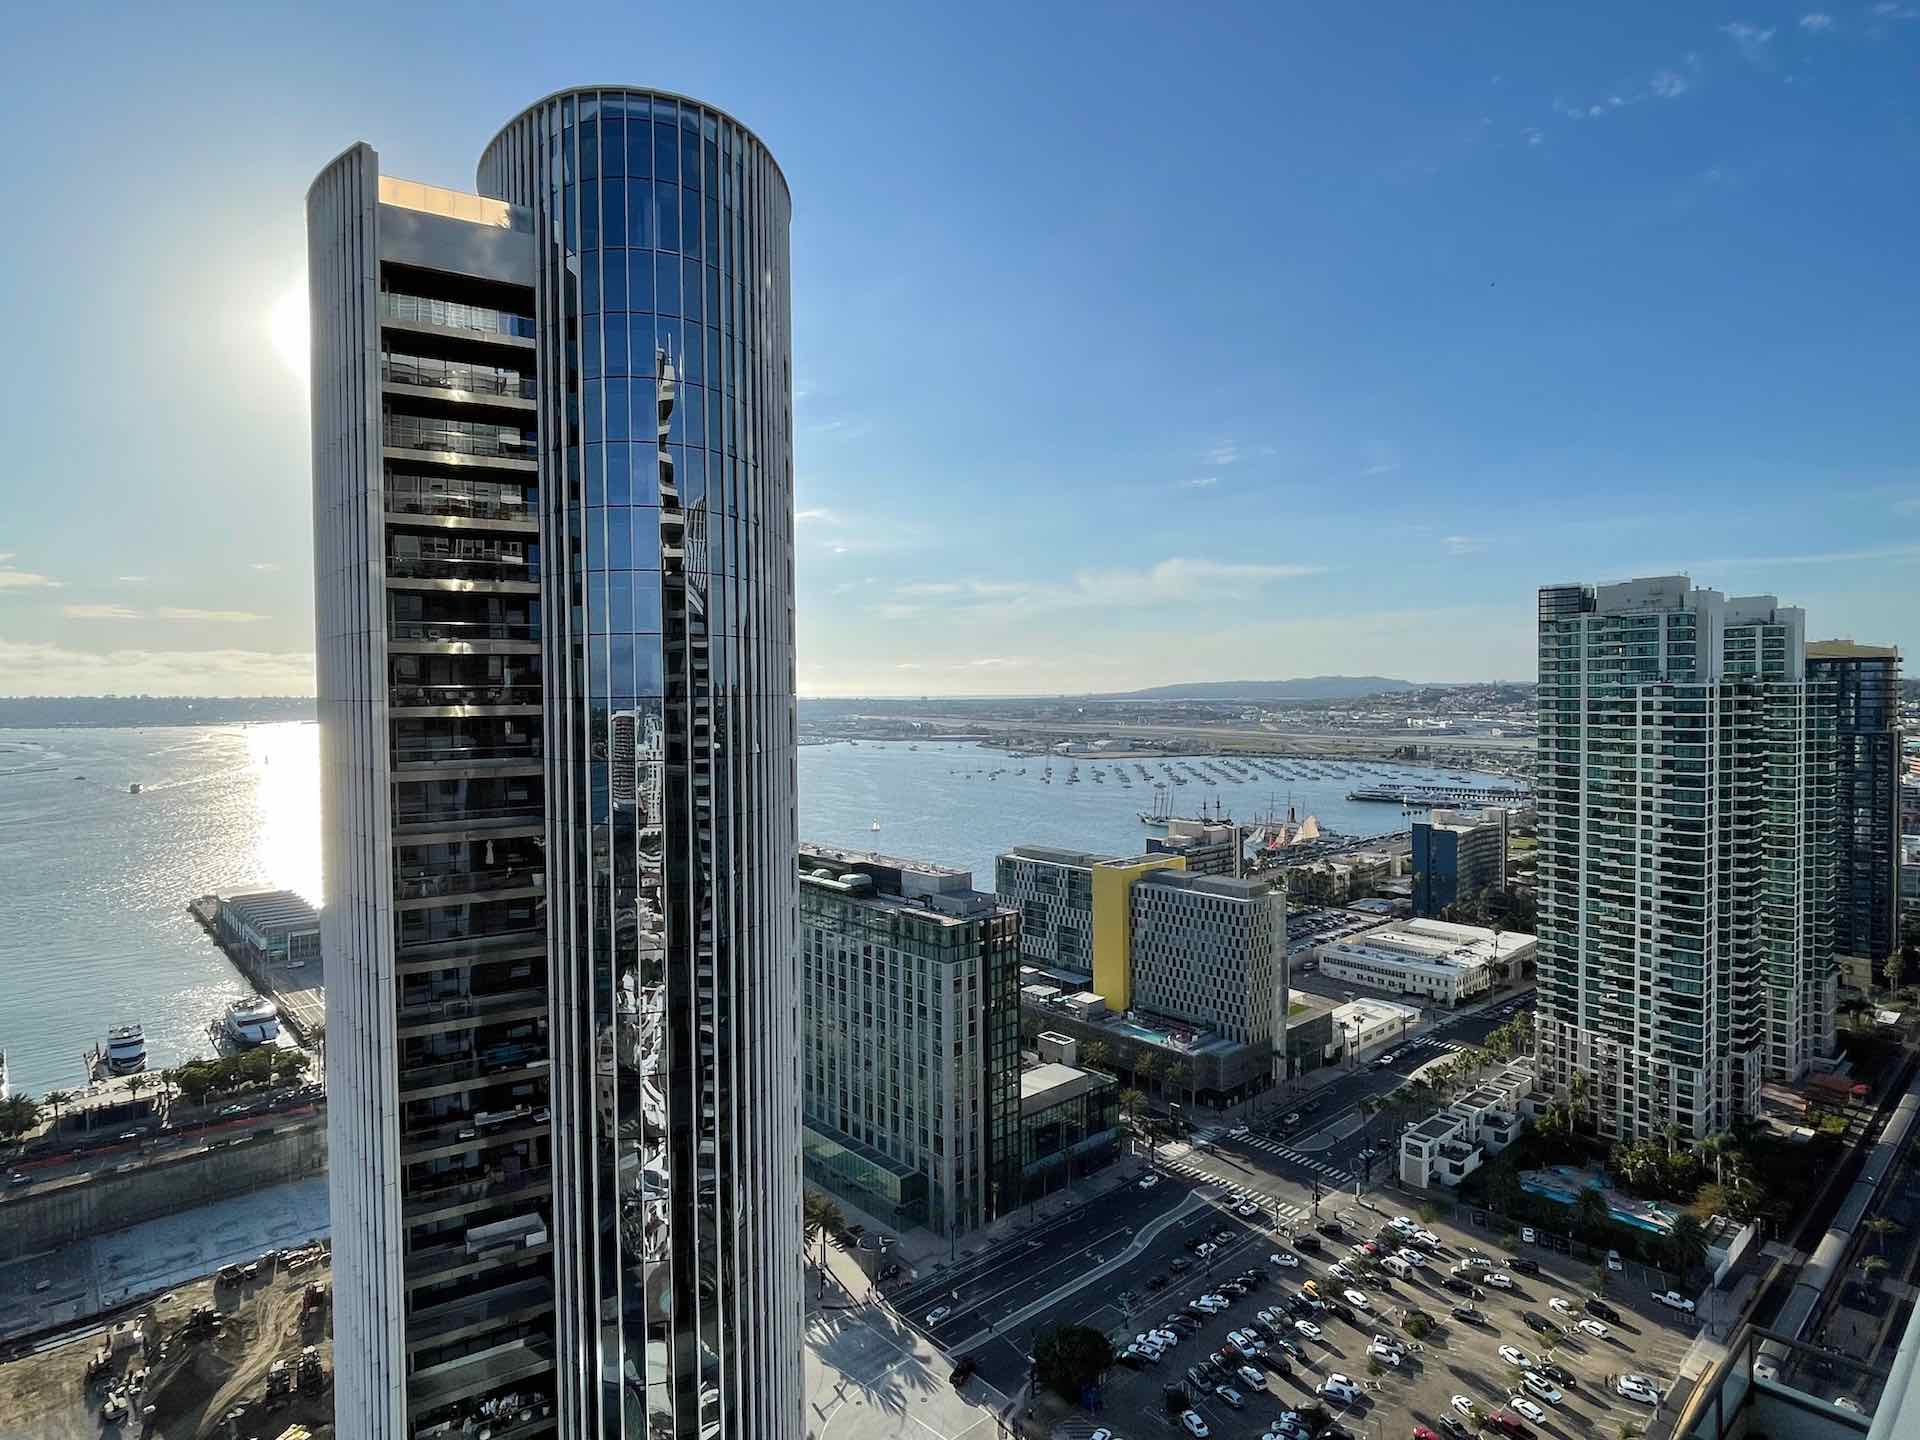 Pacific Gate condo tower in downtown San Diego Columbia District